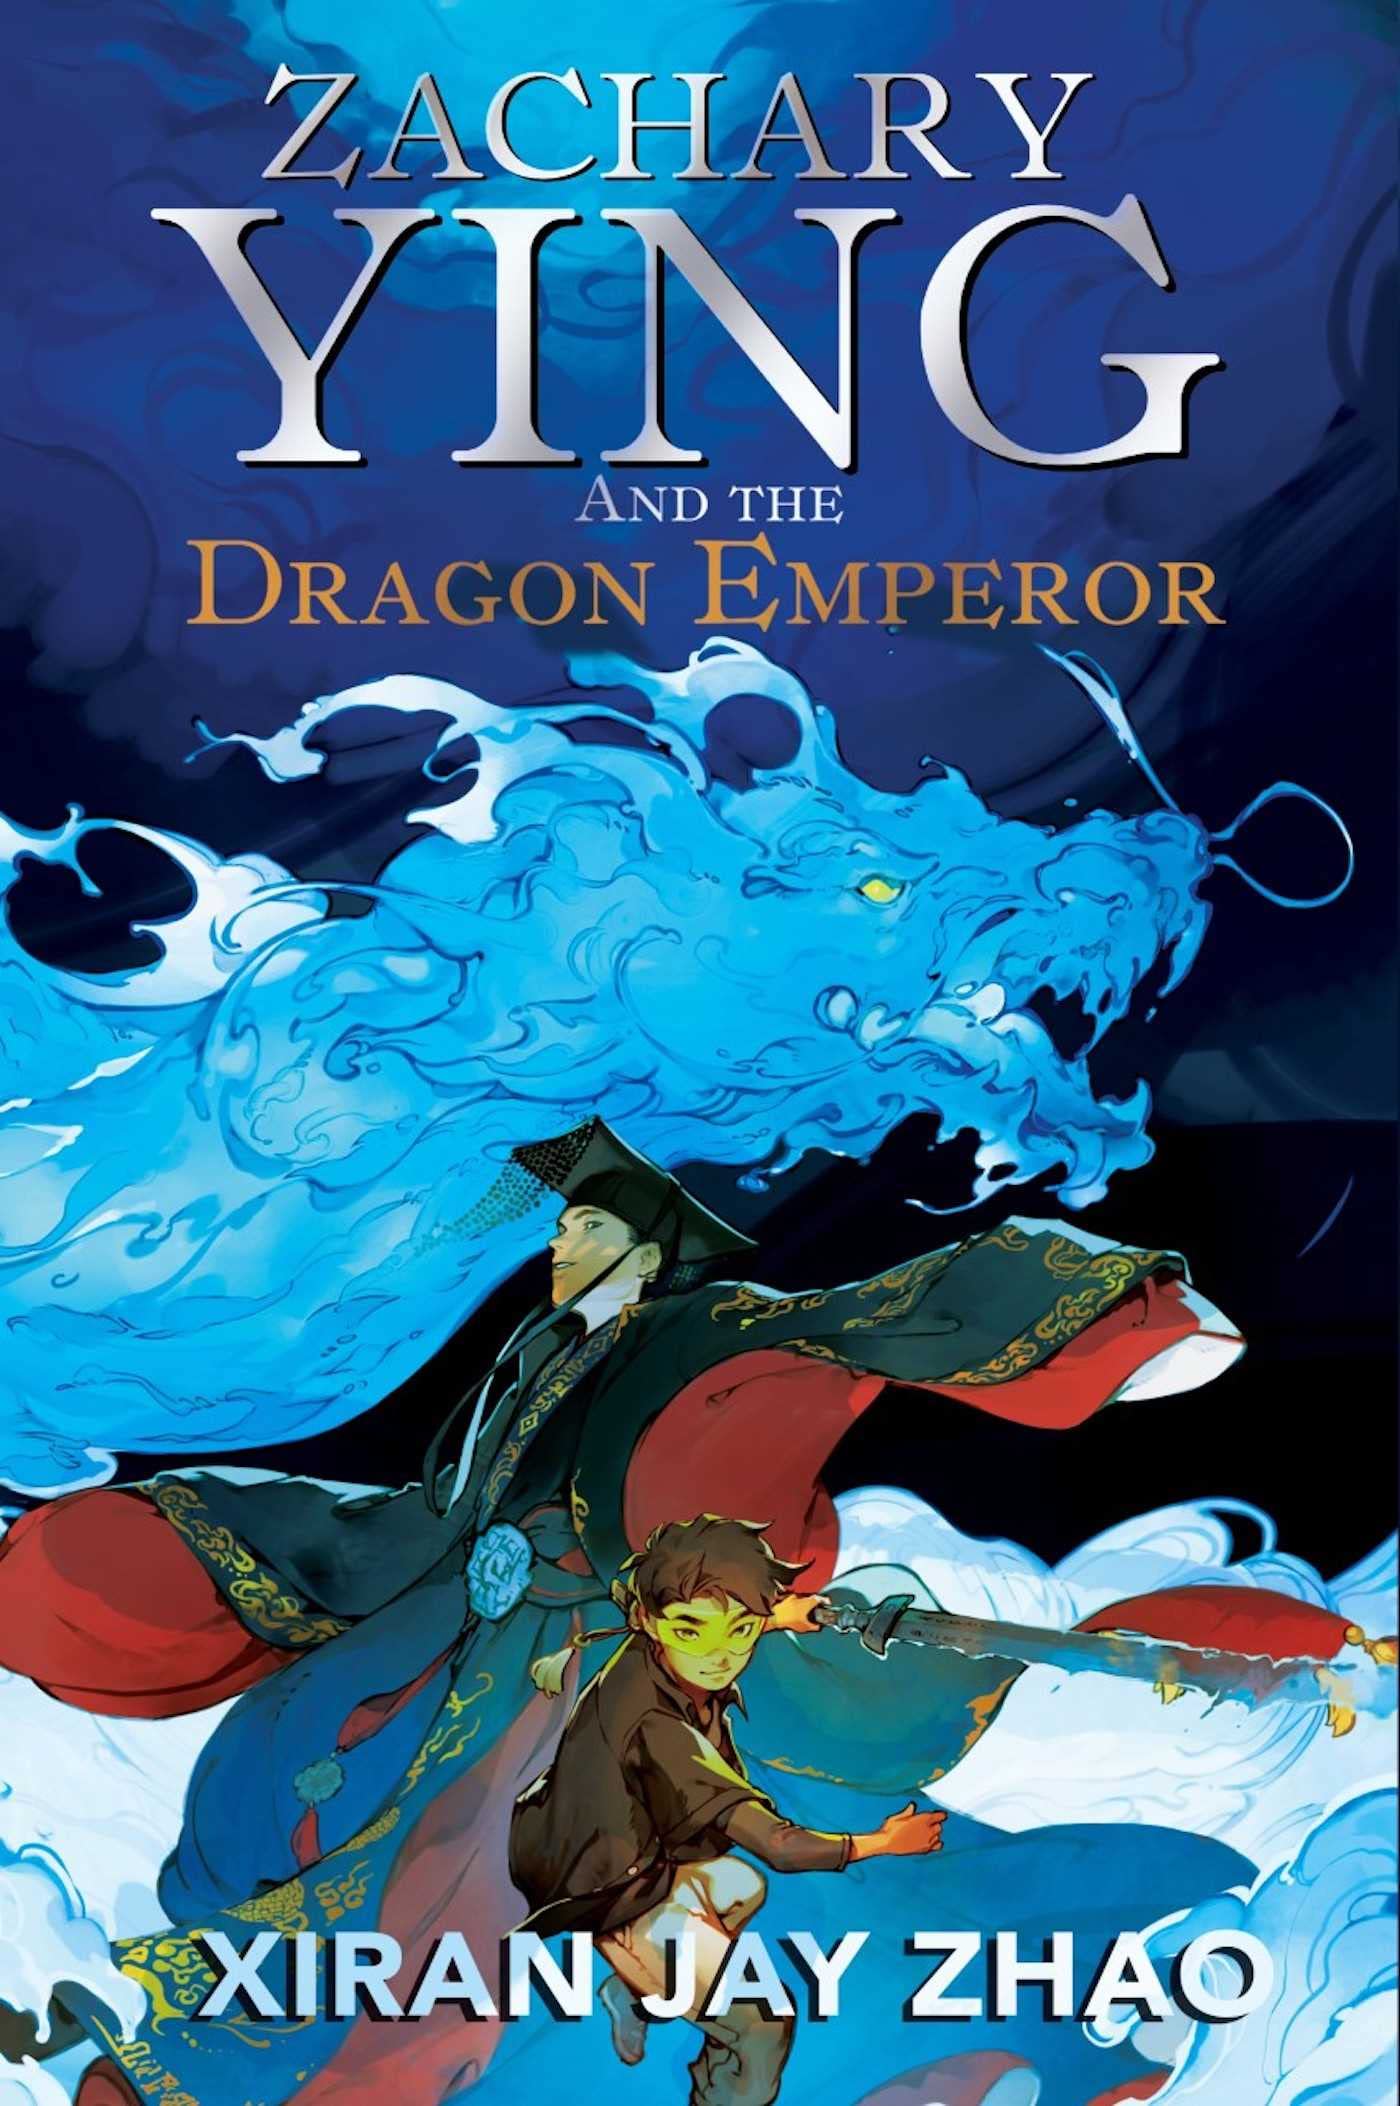 Zachary Ying And The Dragon Emperor by Xiran Jay Zhao